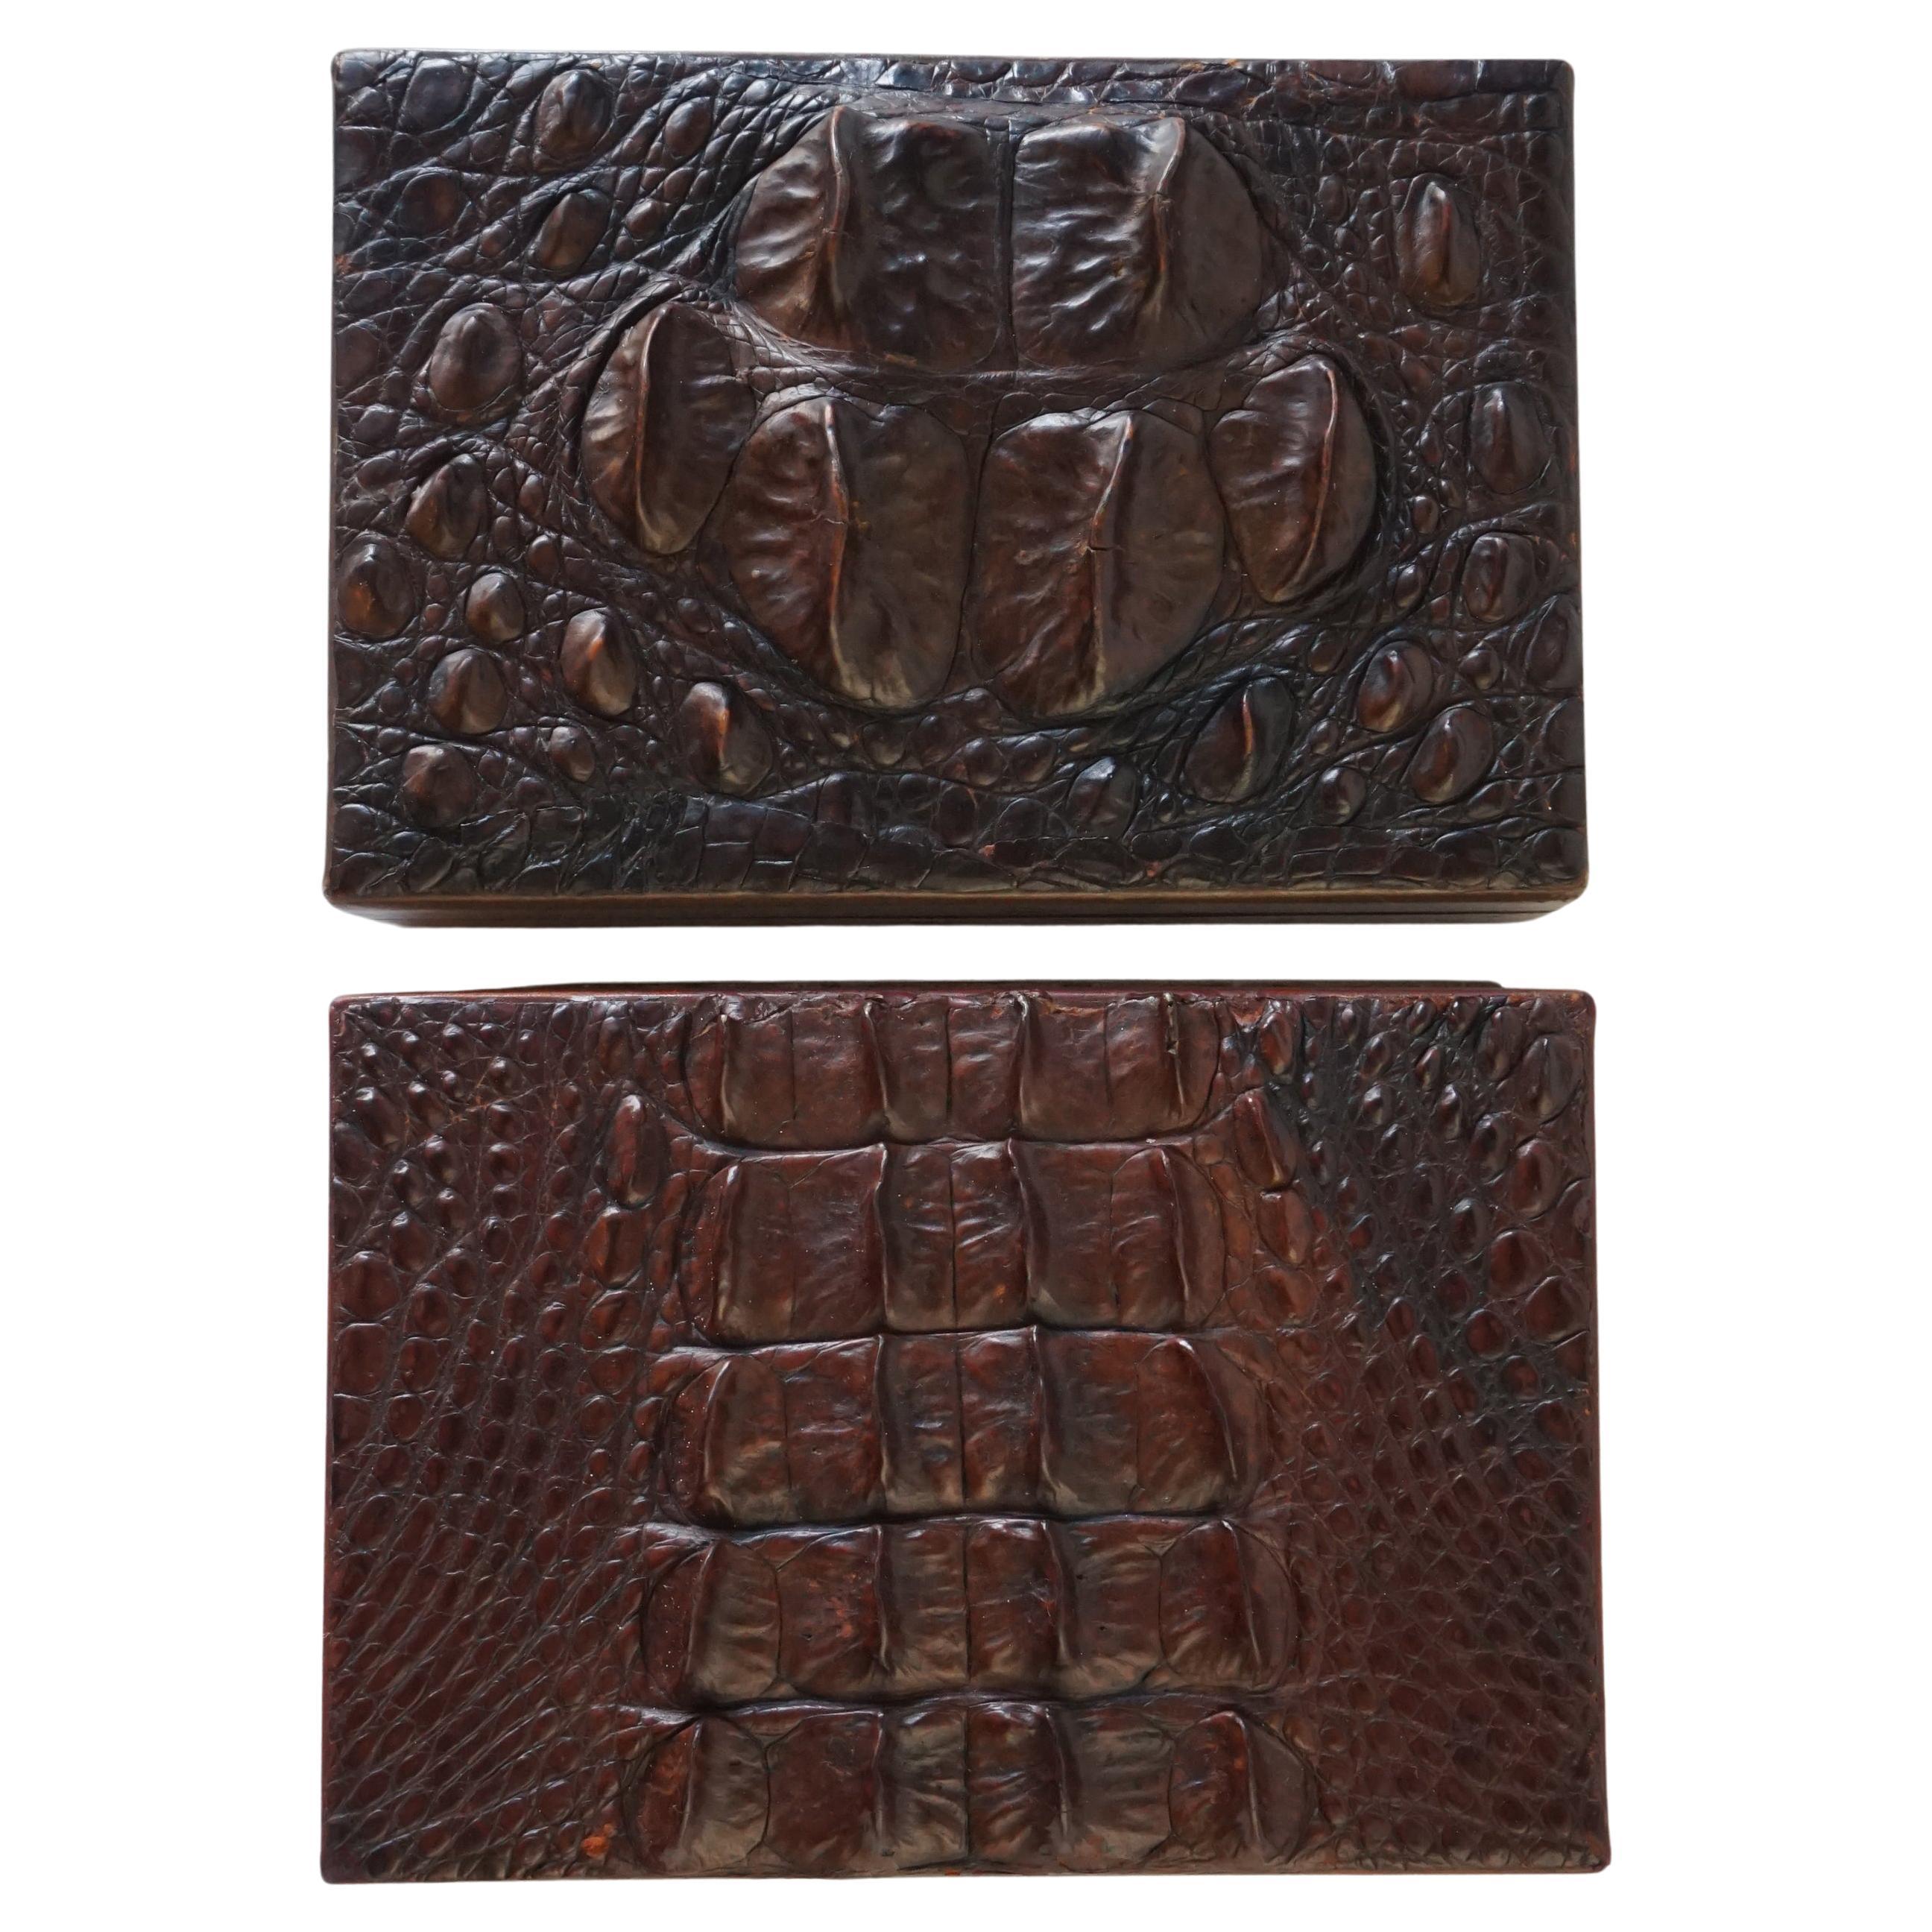 Two Vintage 1960s French Cedar Wood Embossed Crocodile Leather Cigar Boxes